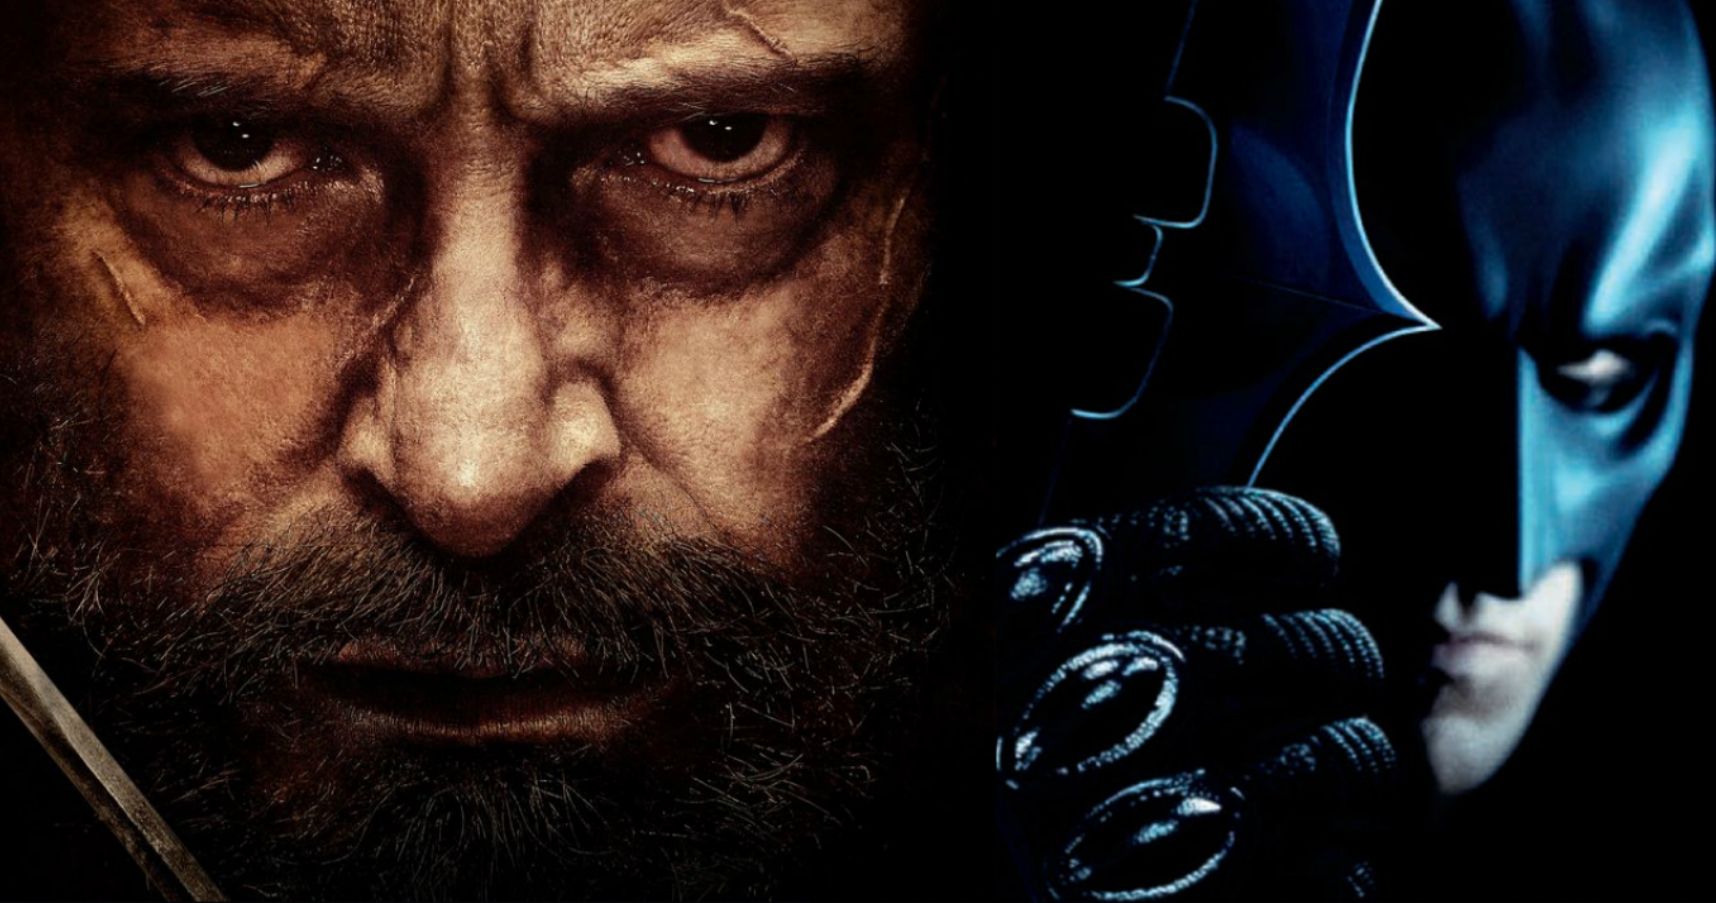 Logan Director Talks The Dark Knight Influence on Wolverine and Subverting the Genre